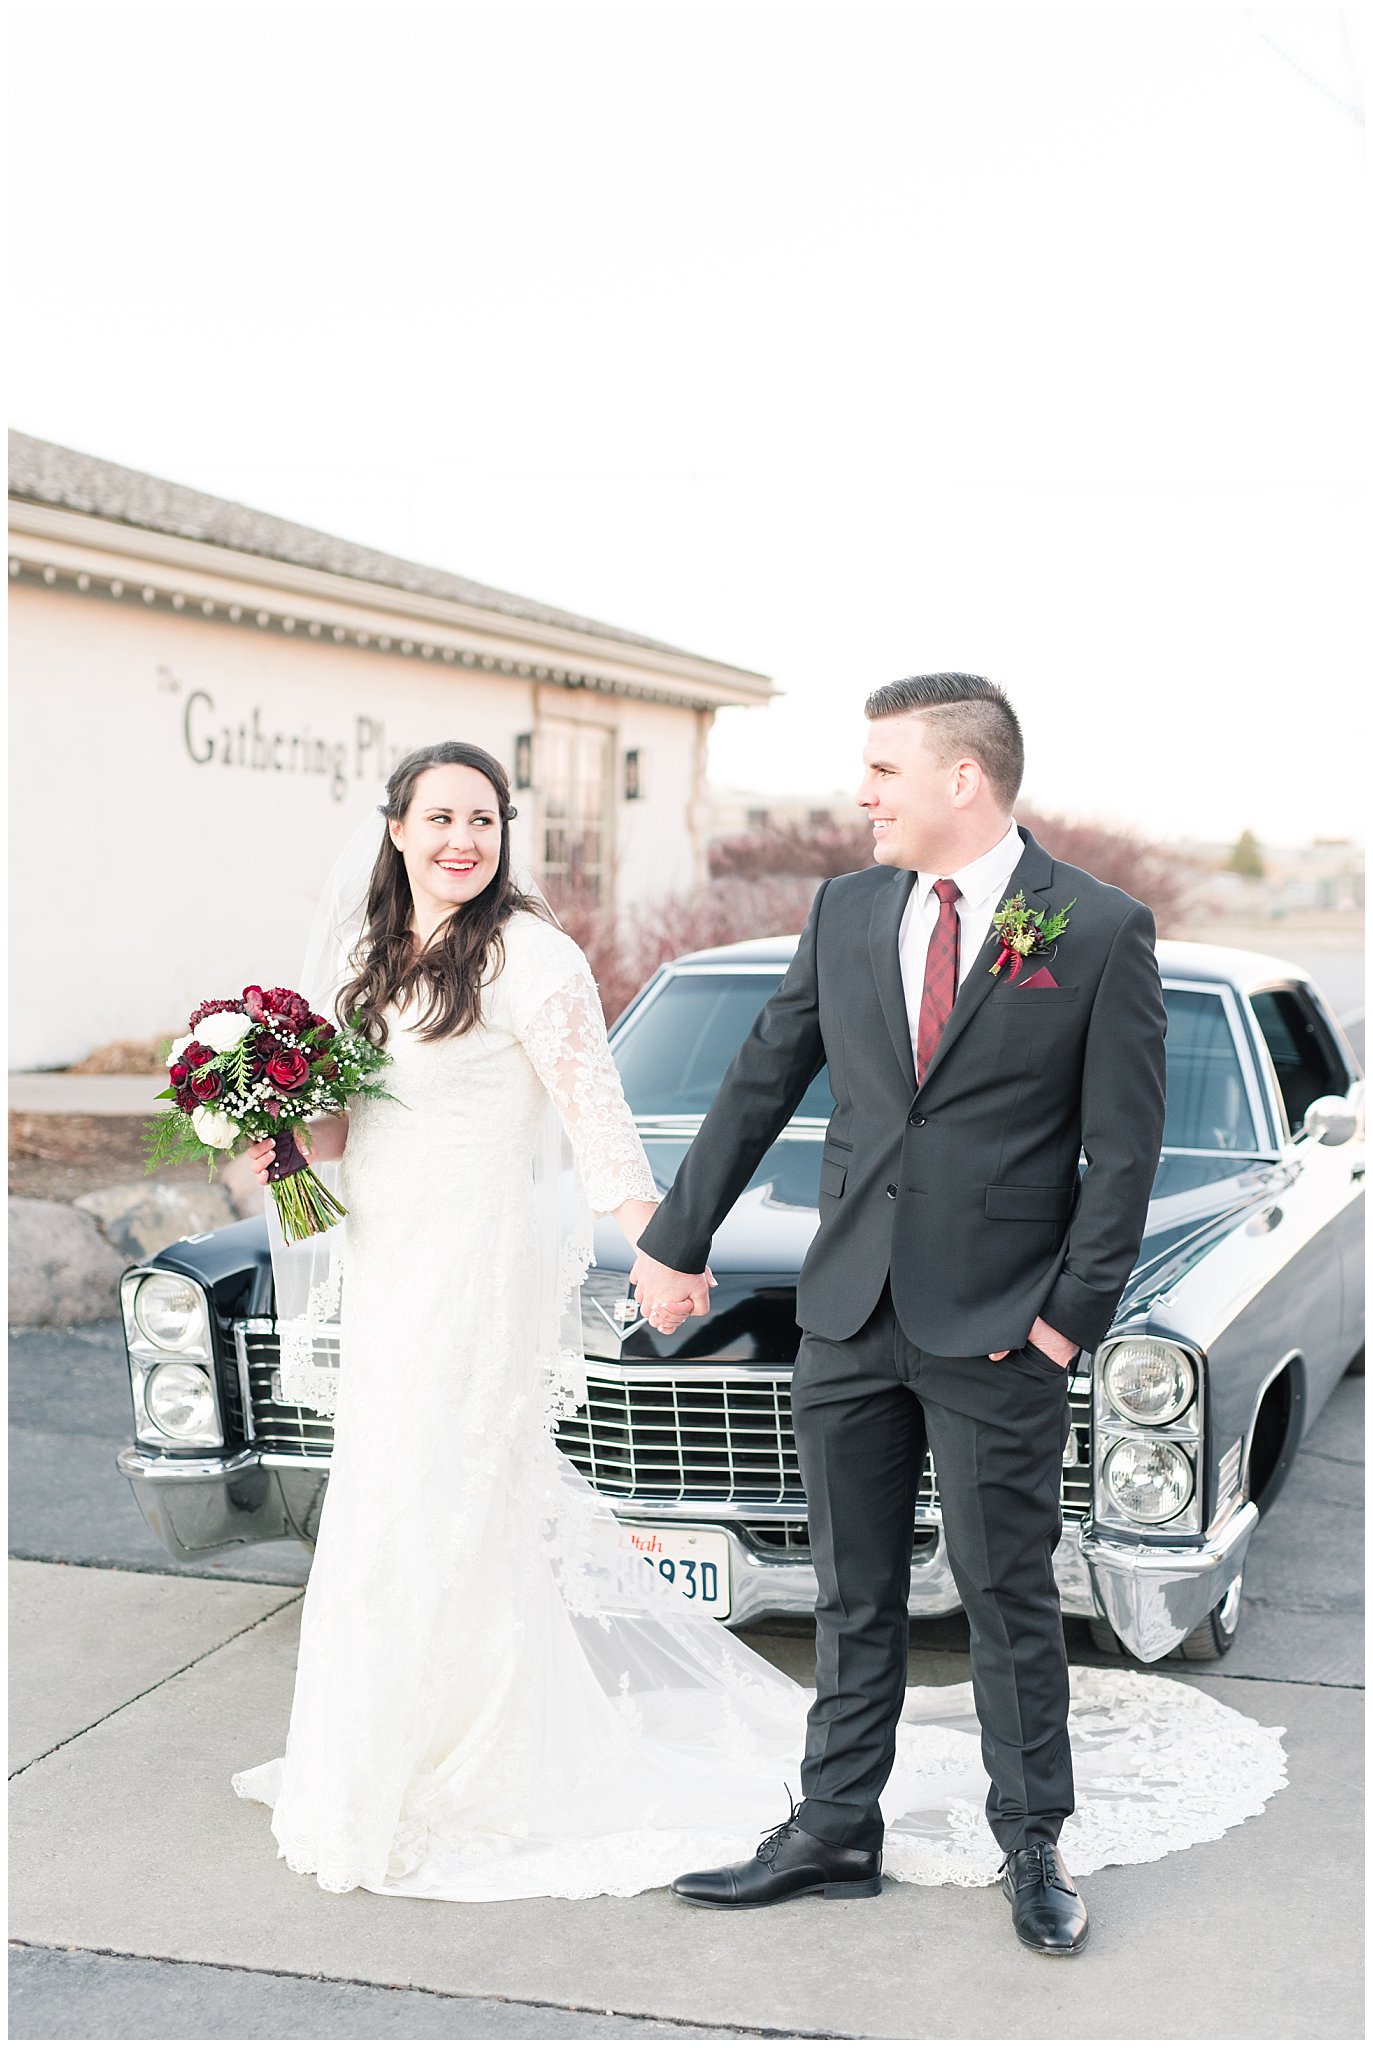 Bride and Groom with 1967 Cadillac classic car wedding day portraits | Oquirrh Mountain Temple and Gardner Village Wedding | The Gathering Place | Jessie and Dallin Photography